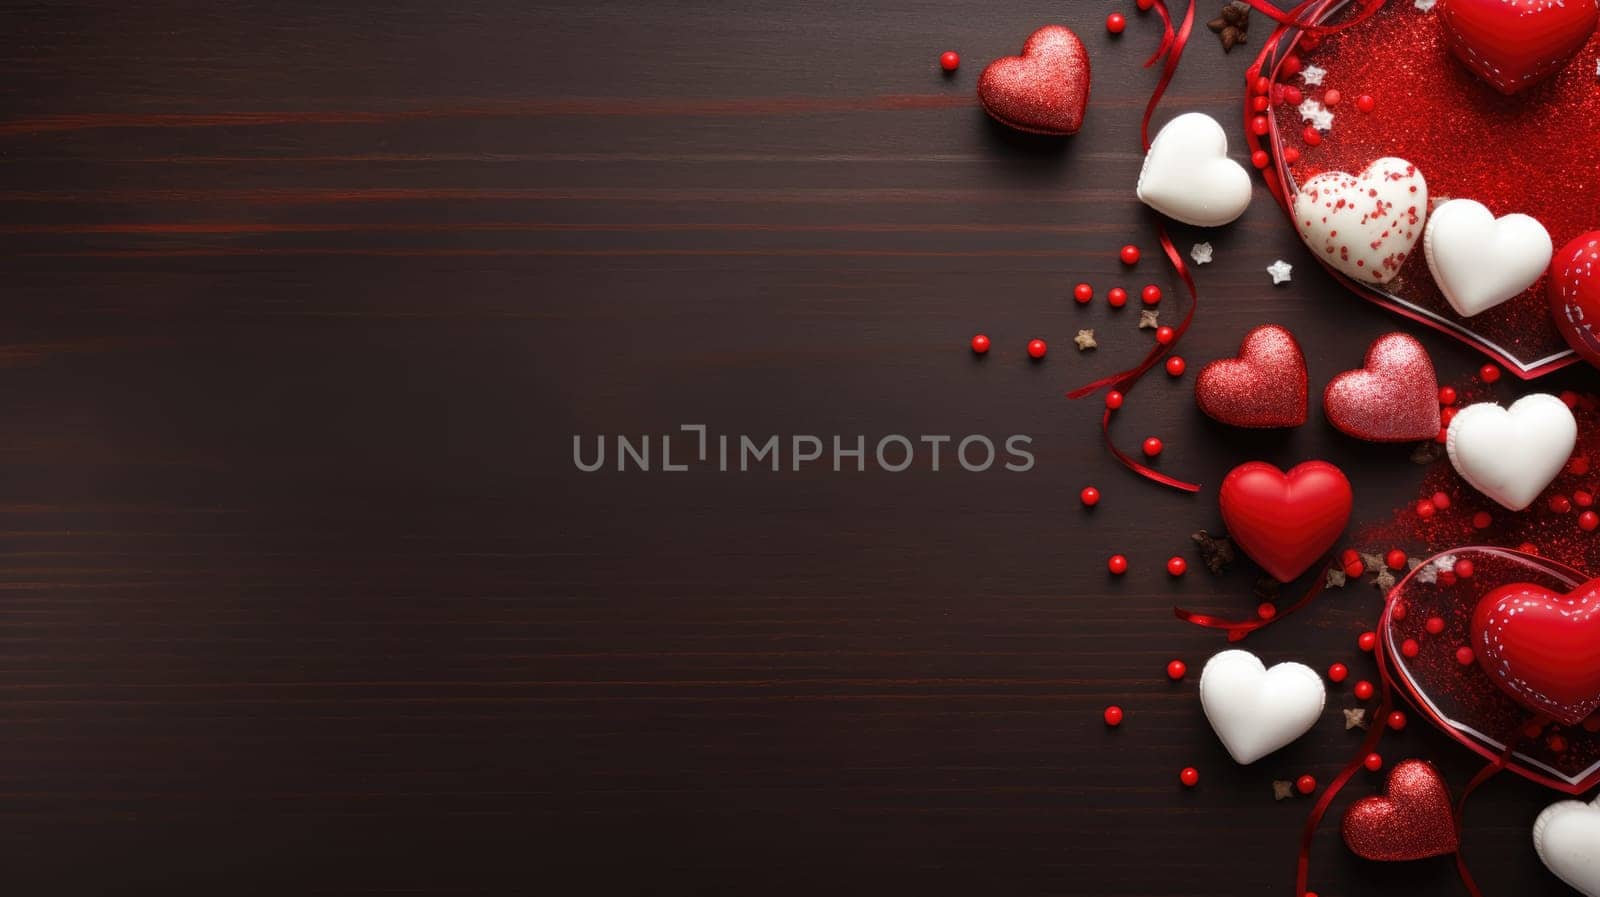 Valentines day heart shaped sweets on red background. Top view with copy space. by JuliaDorian